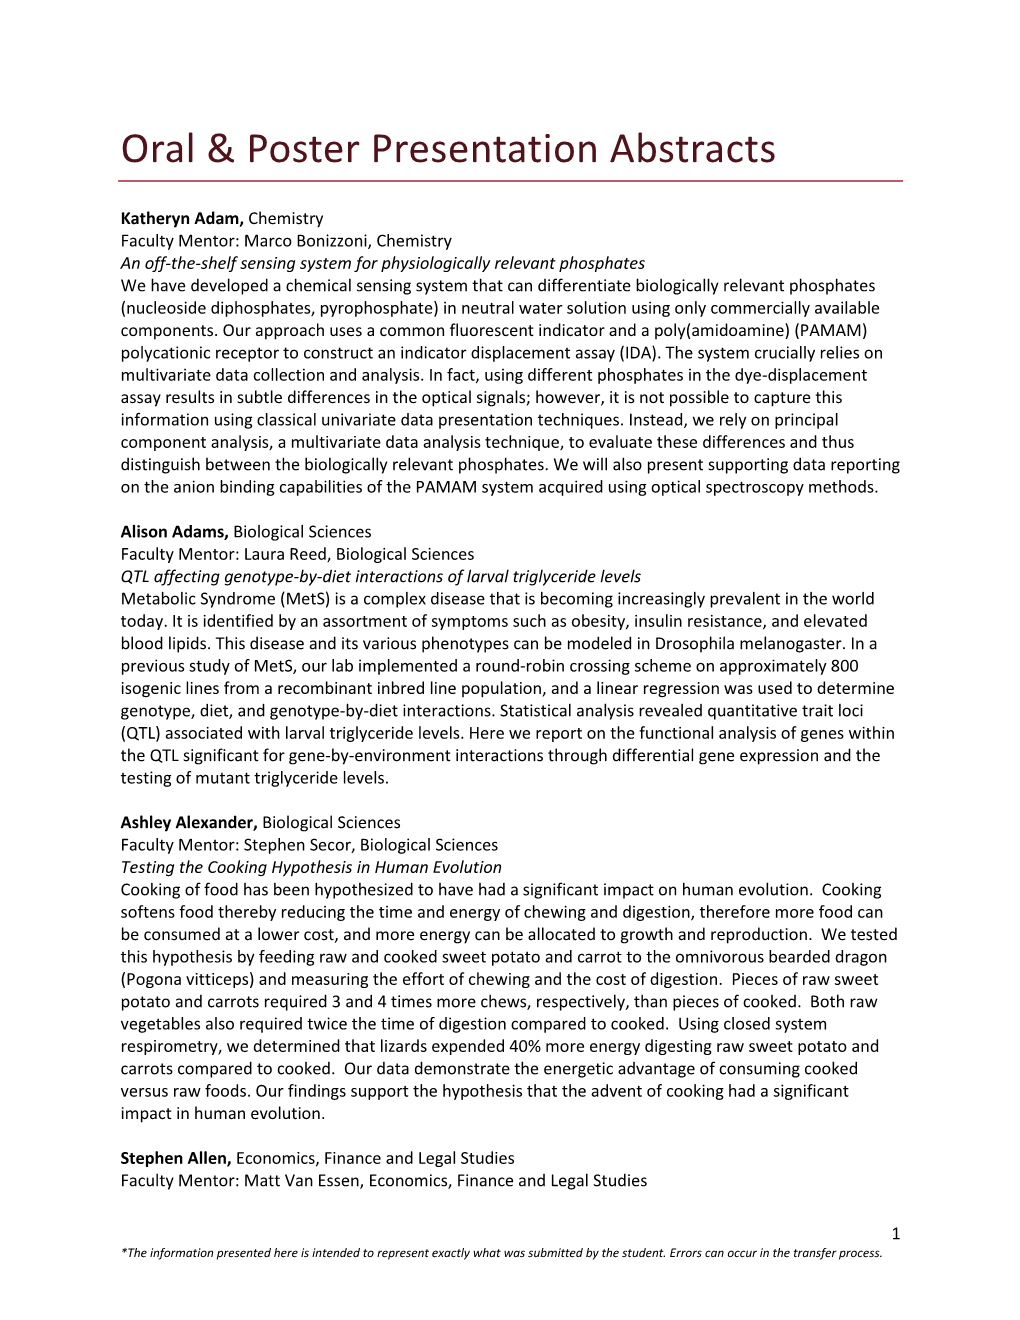 2014 URCA Abstracts for Oral and Poster Presentations